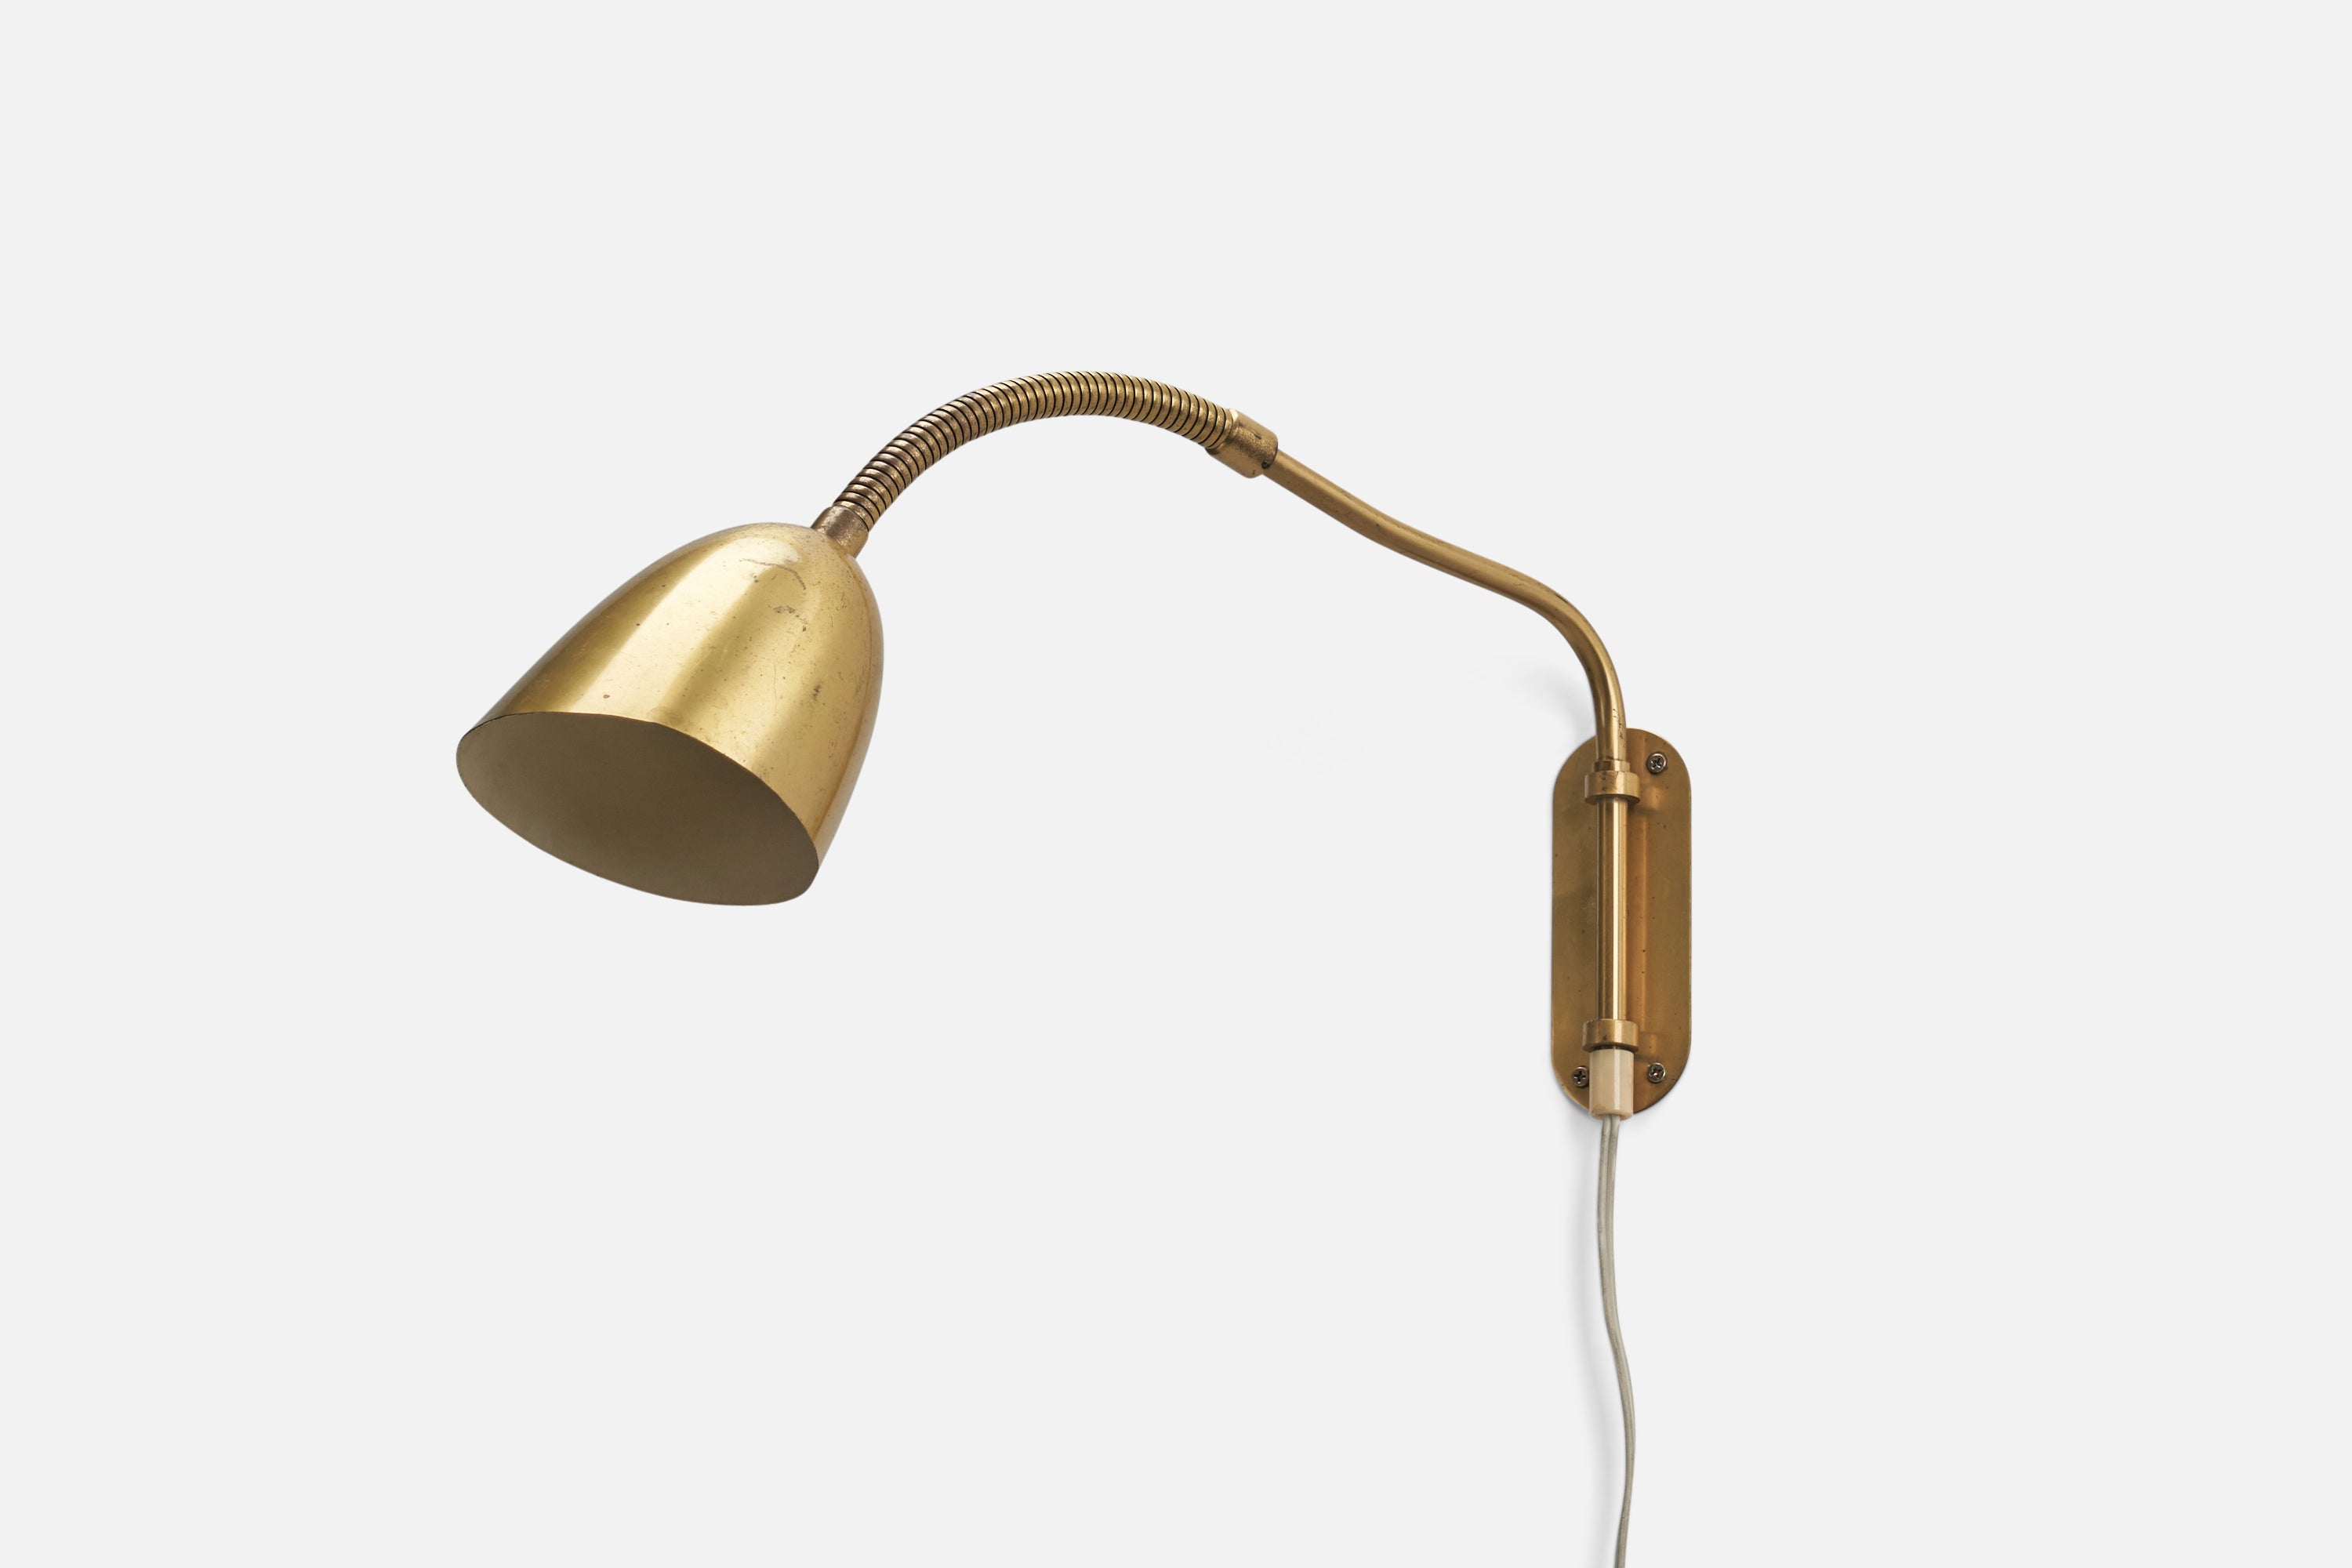 An adjustable brass wall light / sconce designed and produced by Ystad Metall, Sweden, 1940s. Fixture with makers stamp to backplate.

Dimensions of Back Plate (inches): 5.06 x 1.88 x 0.05 (Height x Width x Depth)

Socket takes standard E-26